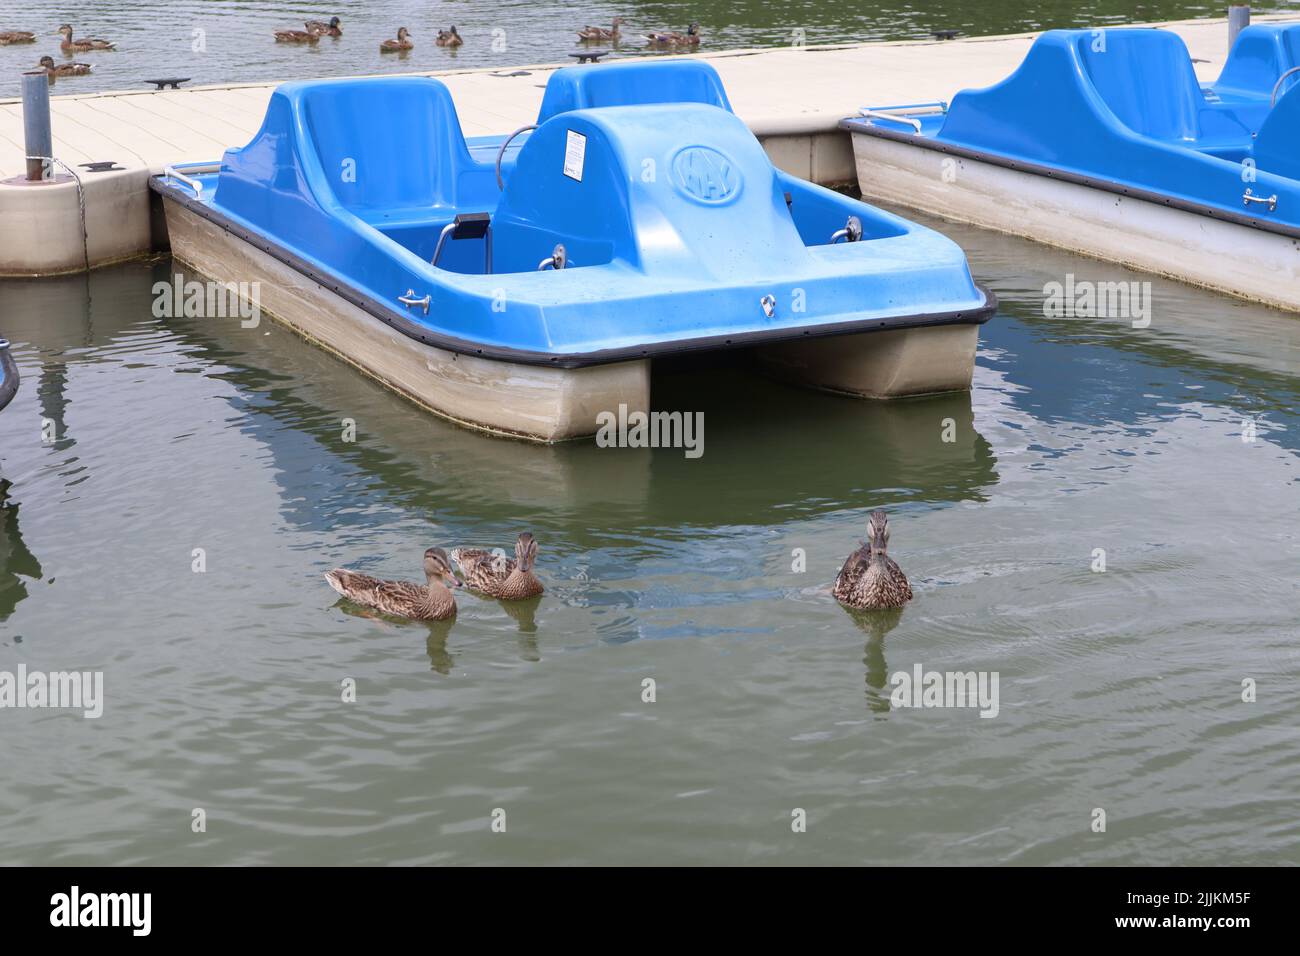 Paddle boats Free Stock Photos, Images, and Pictures of Paddle boats